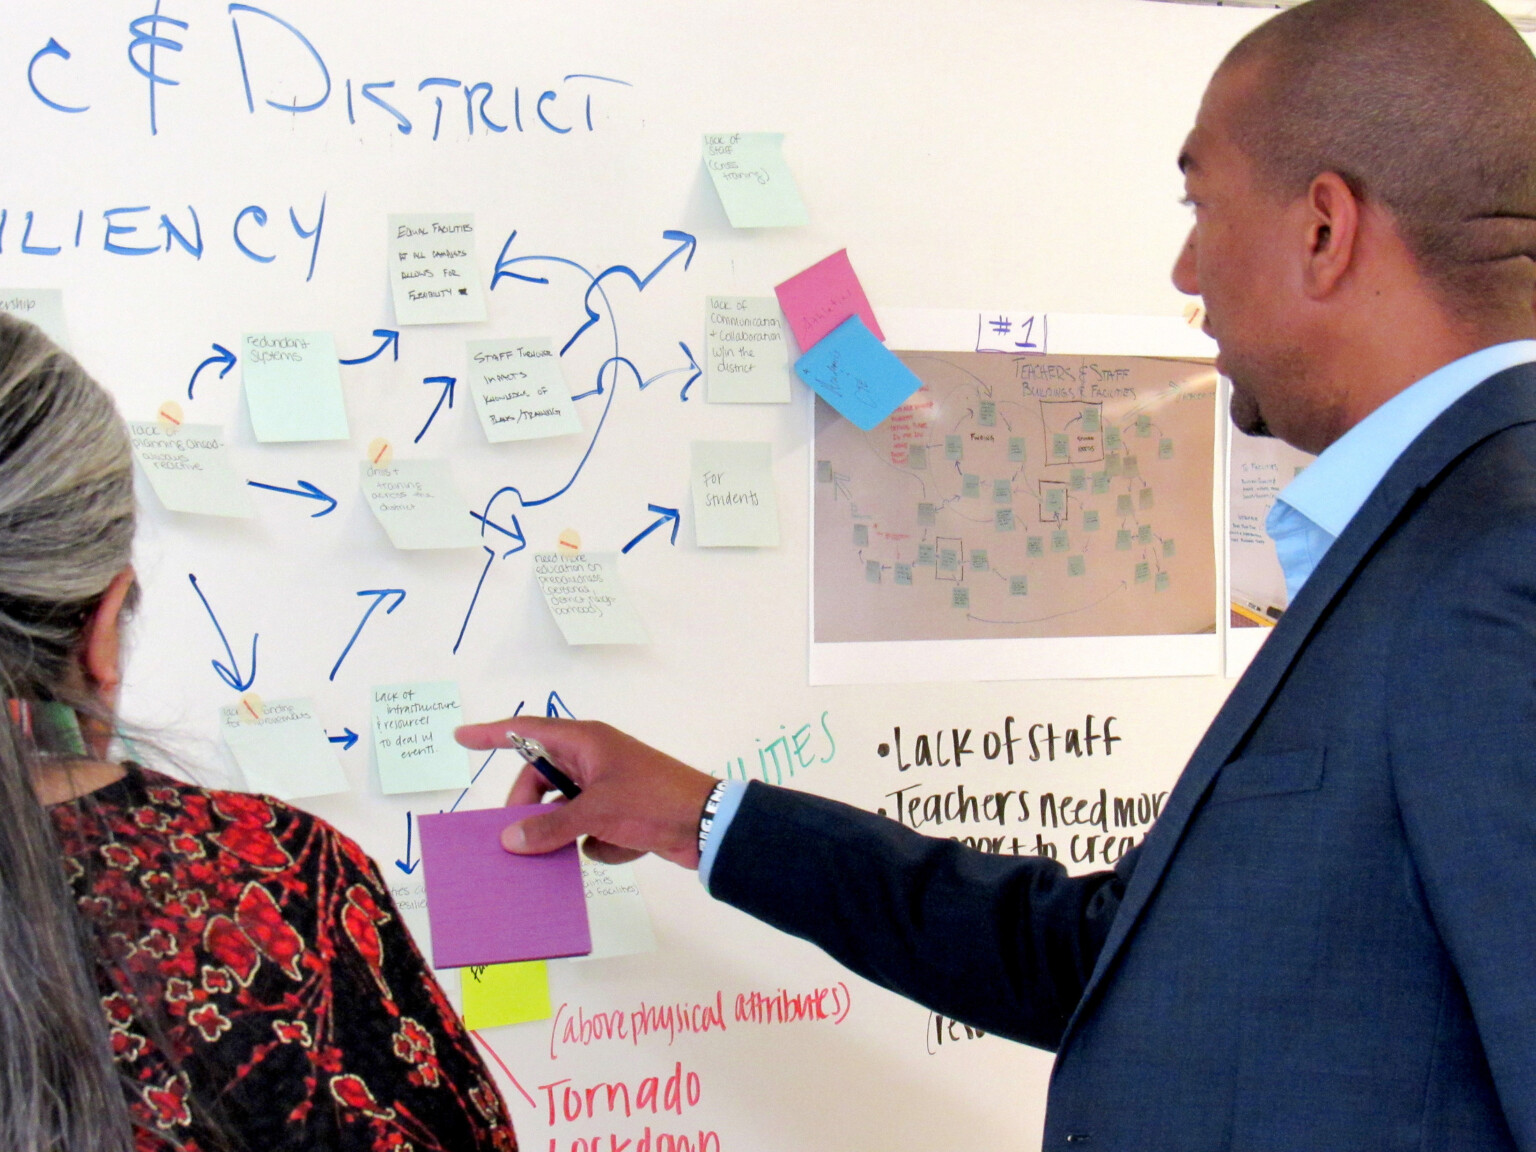 DLR team members master planning k-12 educational facility using whiteboard, post-it notes, collaboration